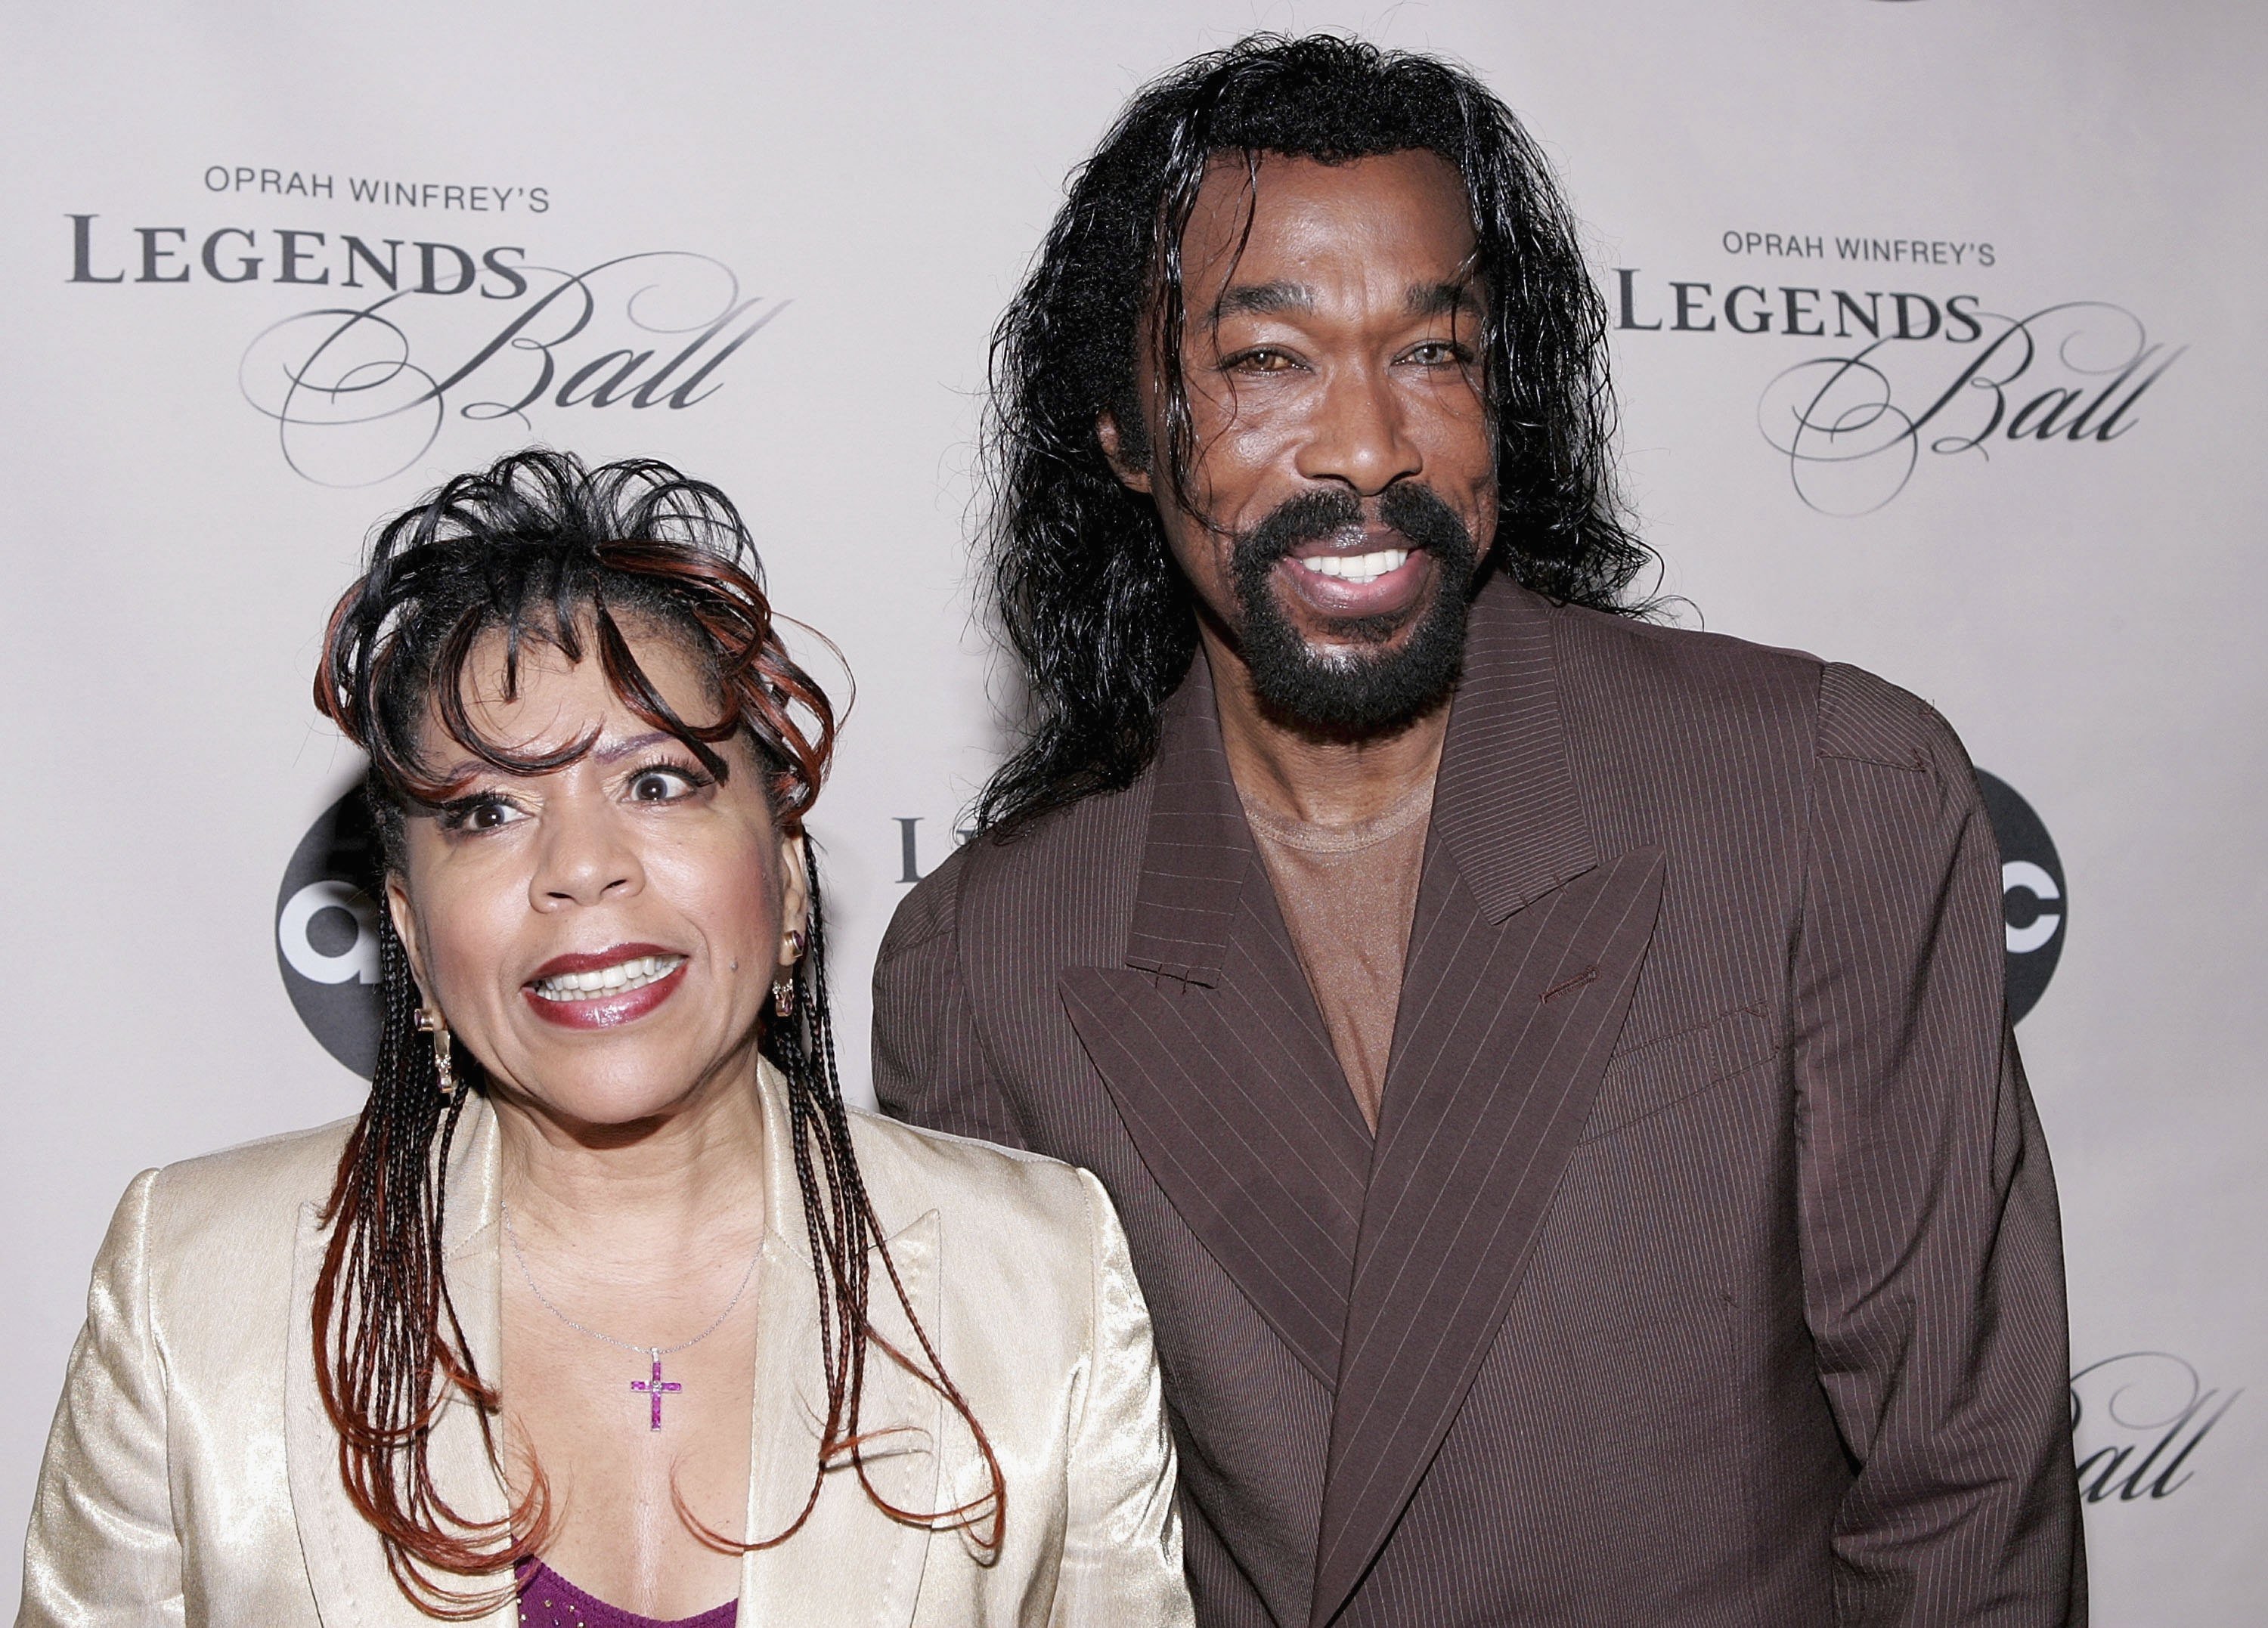 Valerie Simpson and Nick Ashford attend the screening of "Oprah Winfrey's Legends Ball" at JP Morgan Library May 11, 2006. | Photo: GettyImages